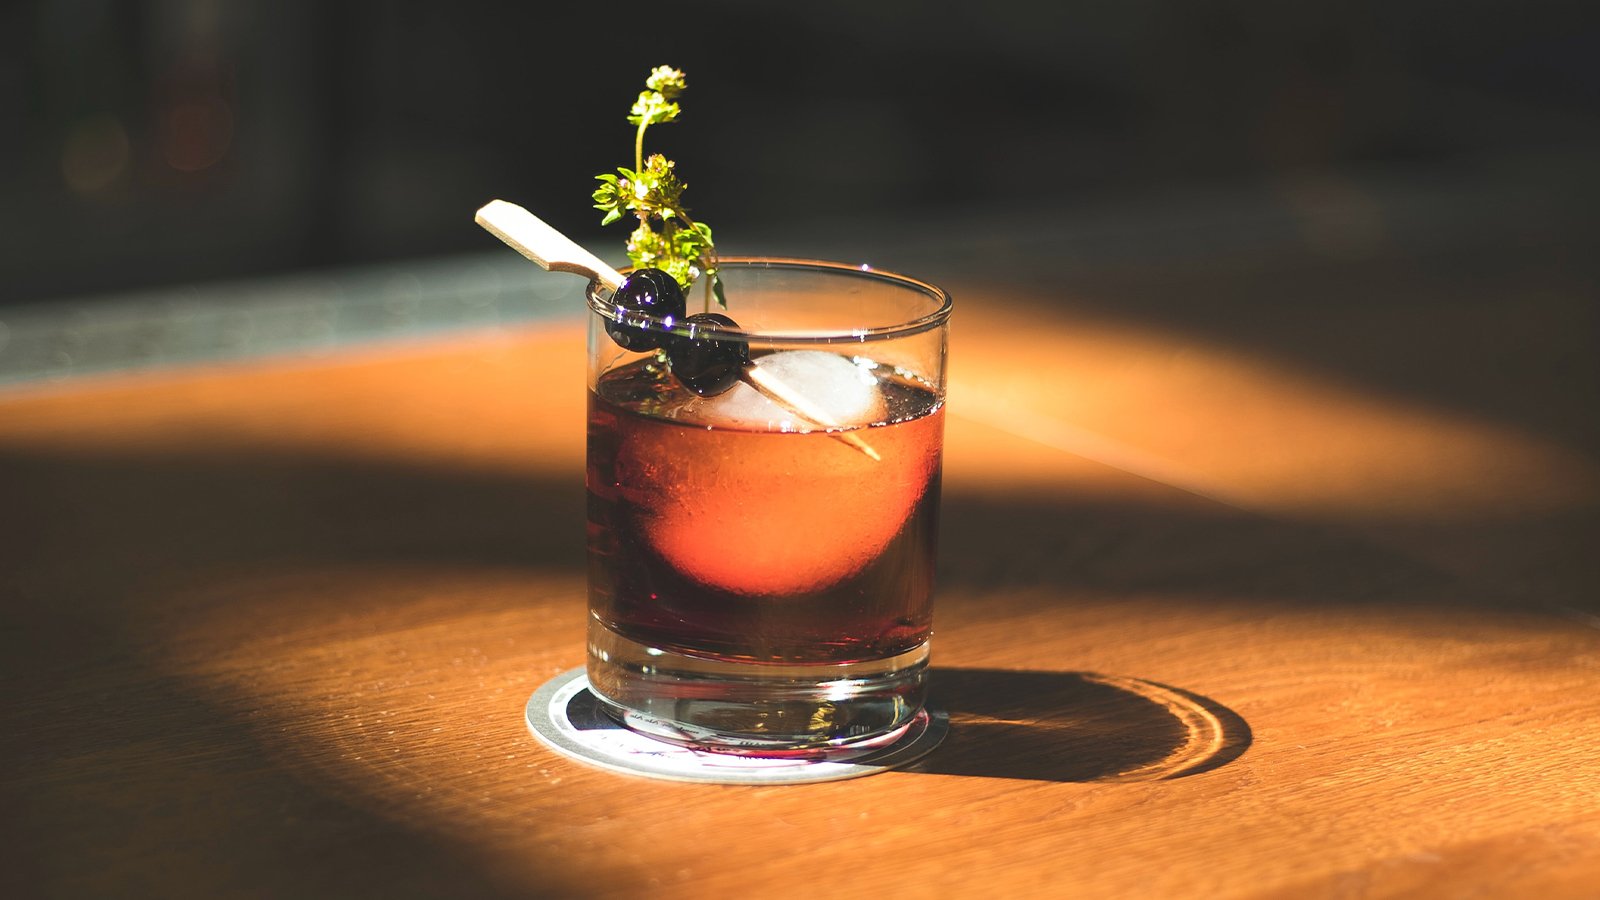 An image of a cocktail sitting on a wooden table.